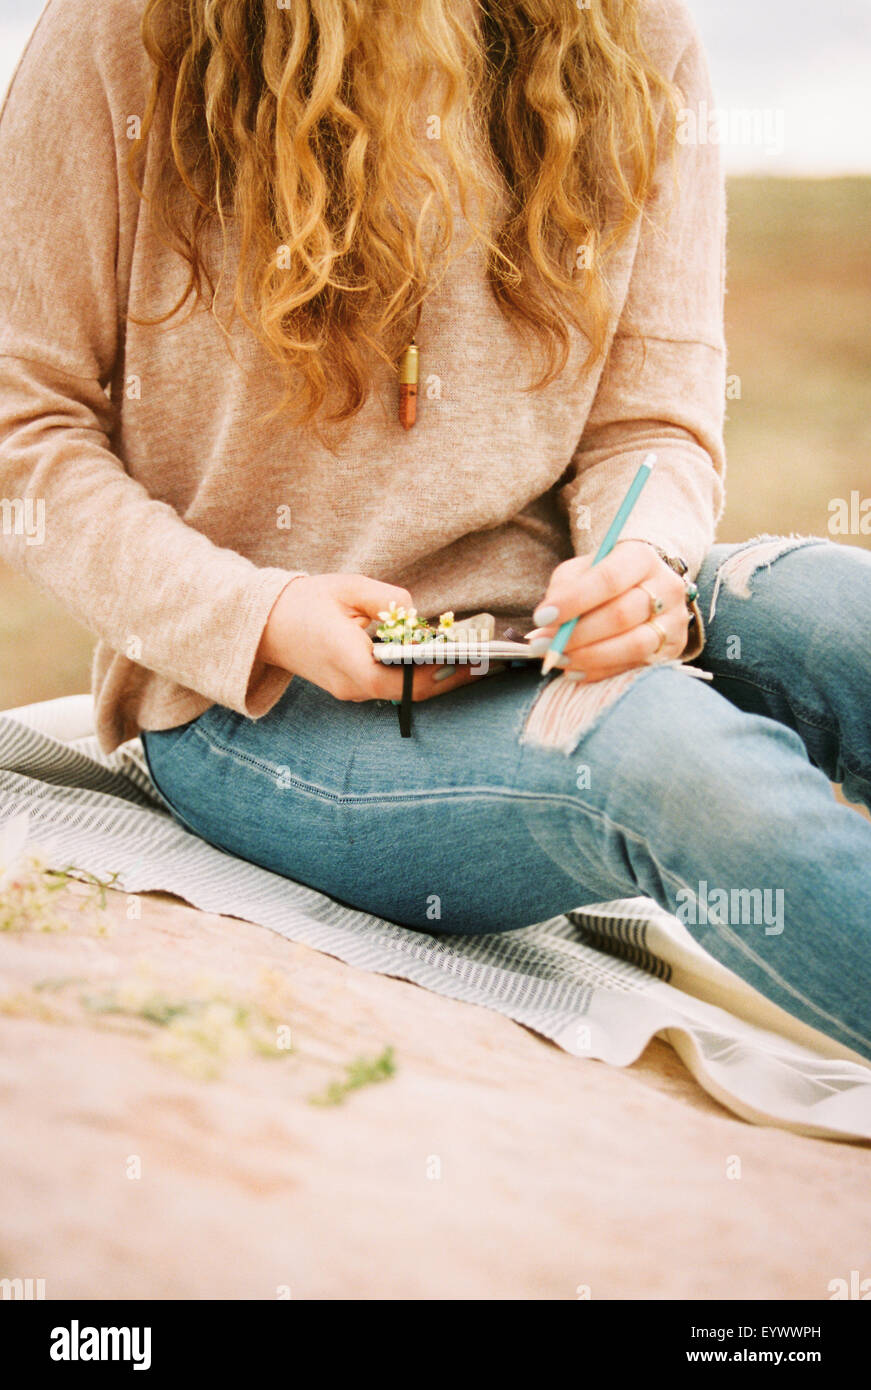 Woman sitting in a desert notebook and pencil. Stock Photo